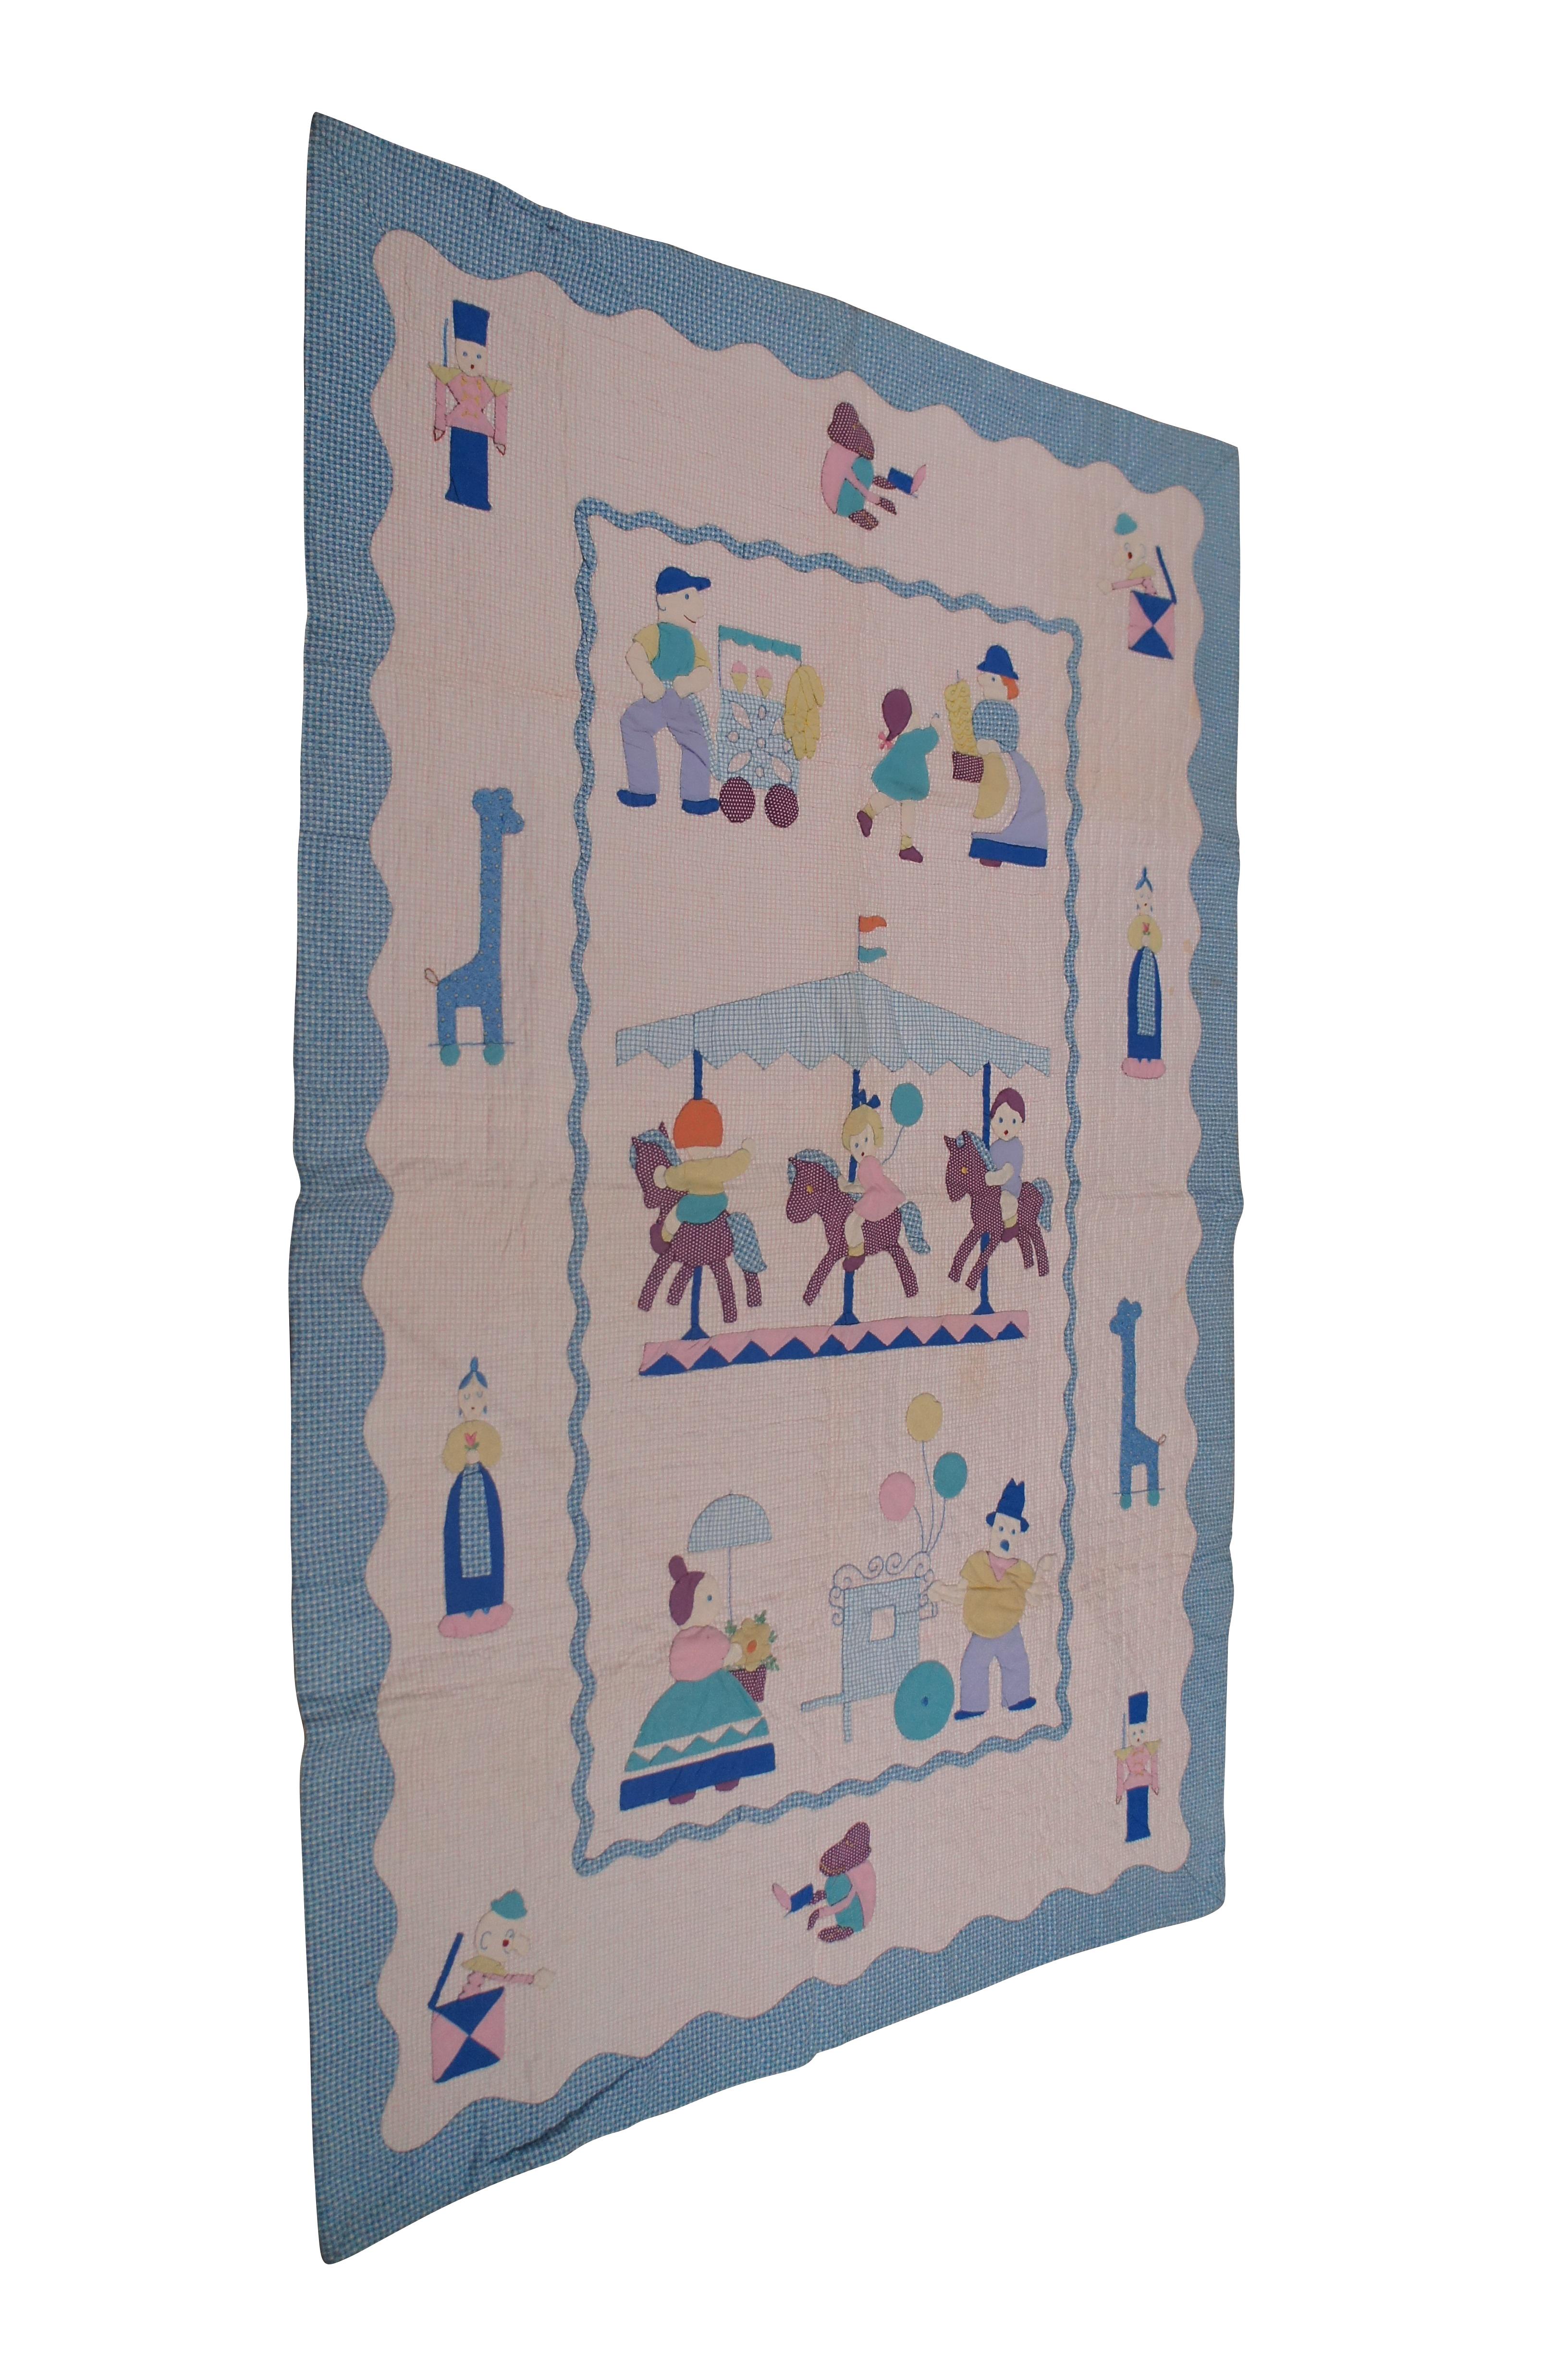 Merry Go Round crib quilt in applique, a Paragon kit quilt, circa 1960s.  

Dimensions:
36